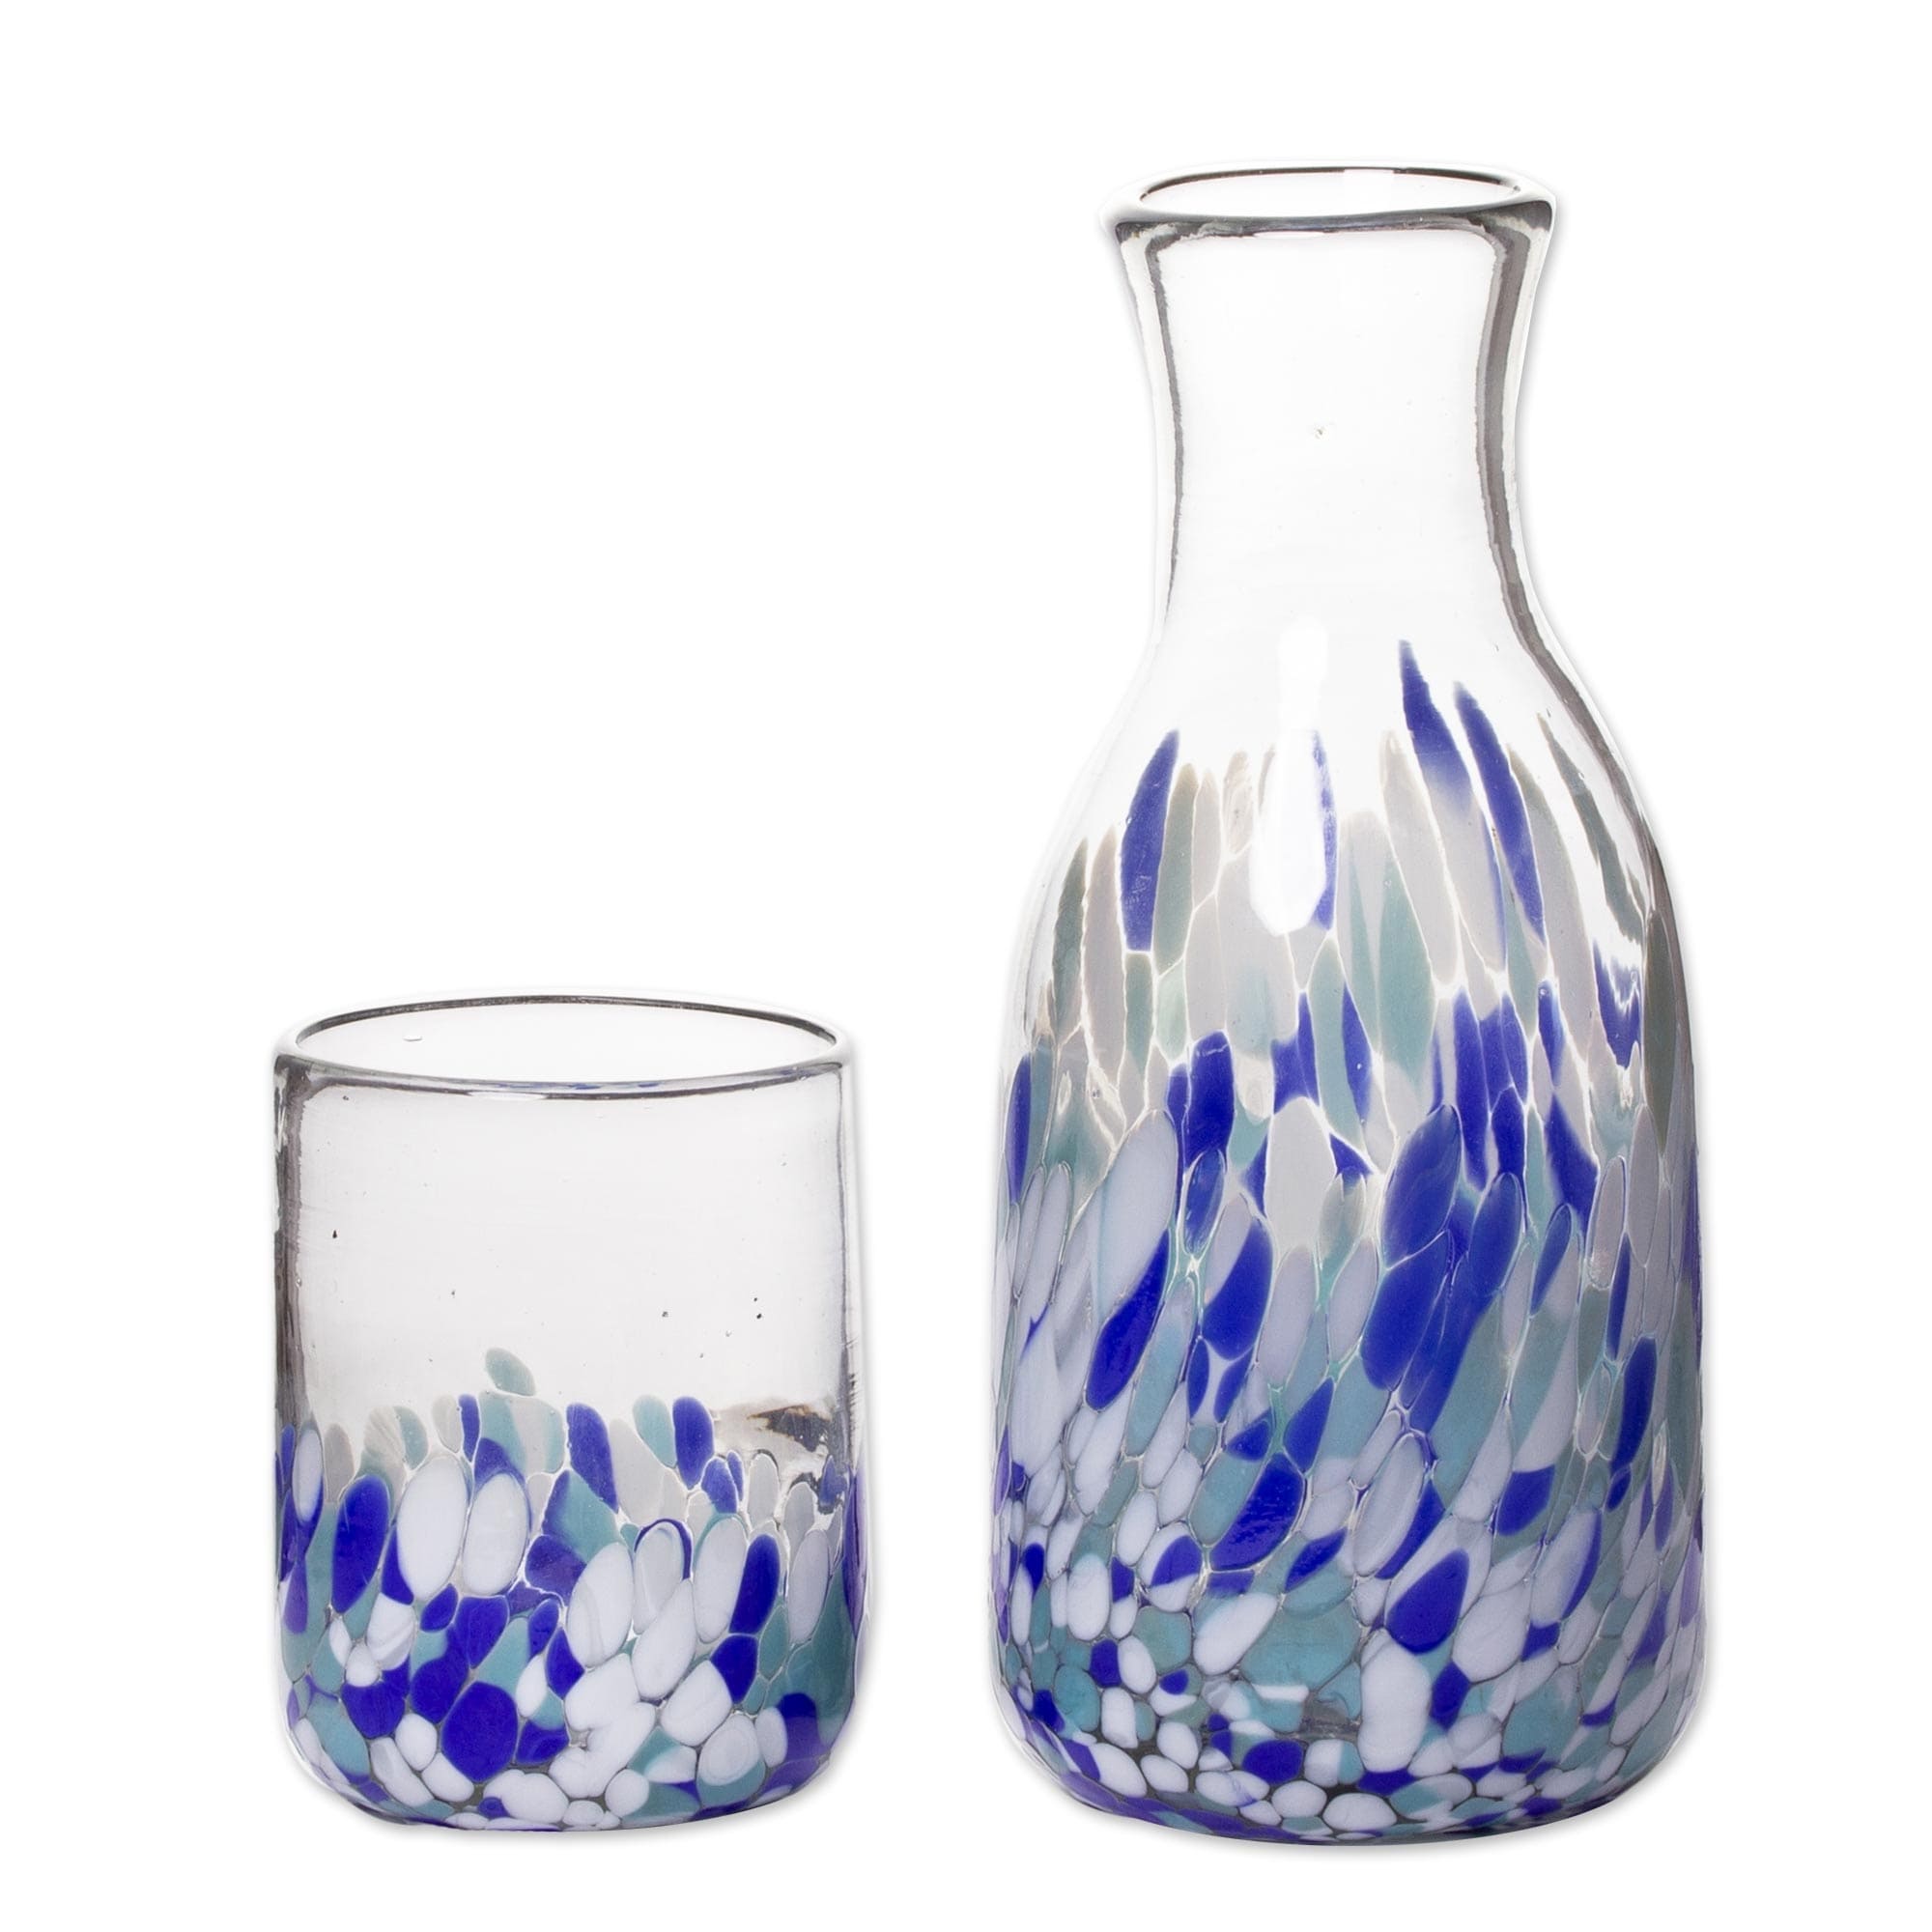 https://ak1.ostkcdn.com/images/products/is/images/direct/983cb54f328d1d8b3c2fcca39cfb36add07b6167/Novica-Handmade-Cool-Water-Handblown-Carafe-And-Glass-Set-%28Pair%29.jpg